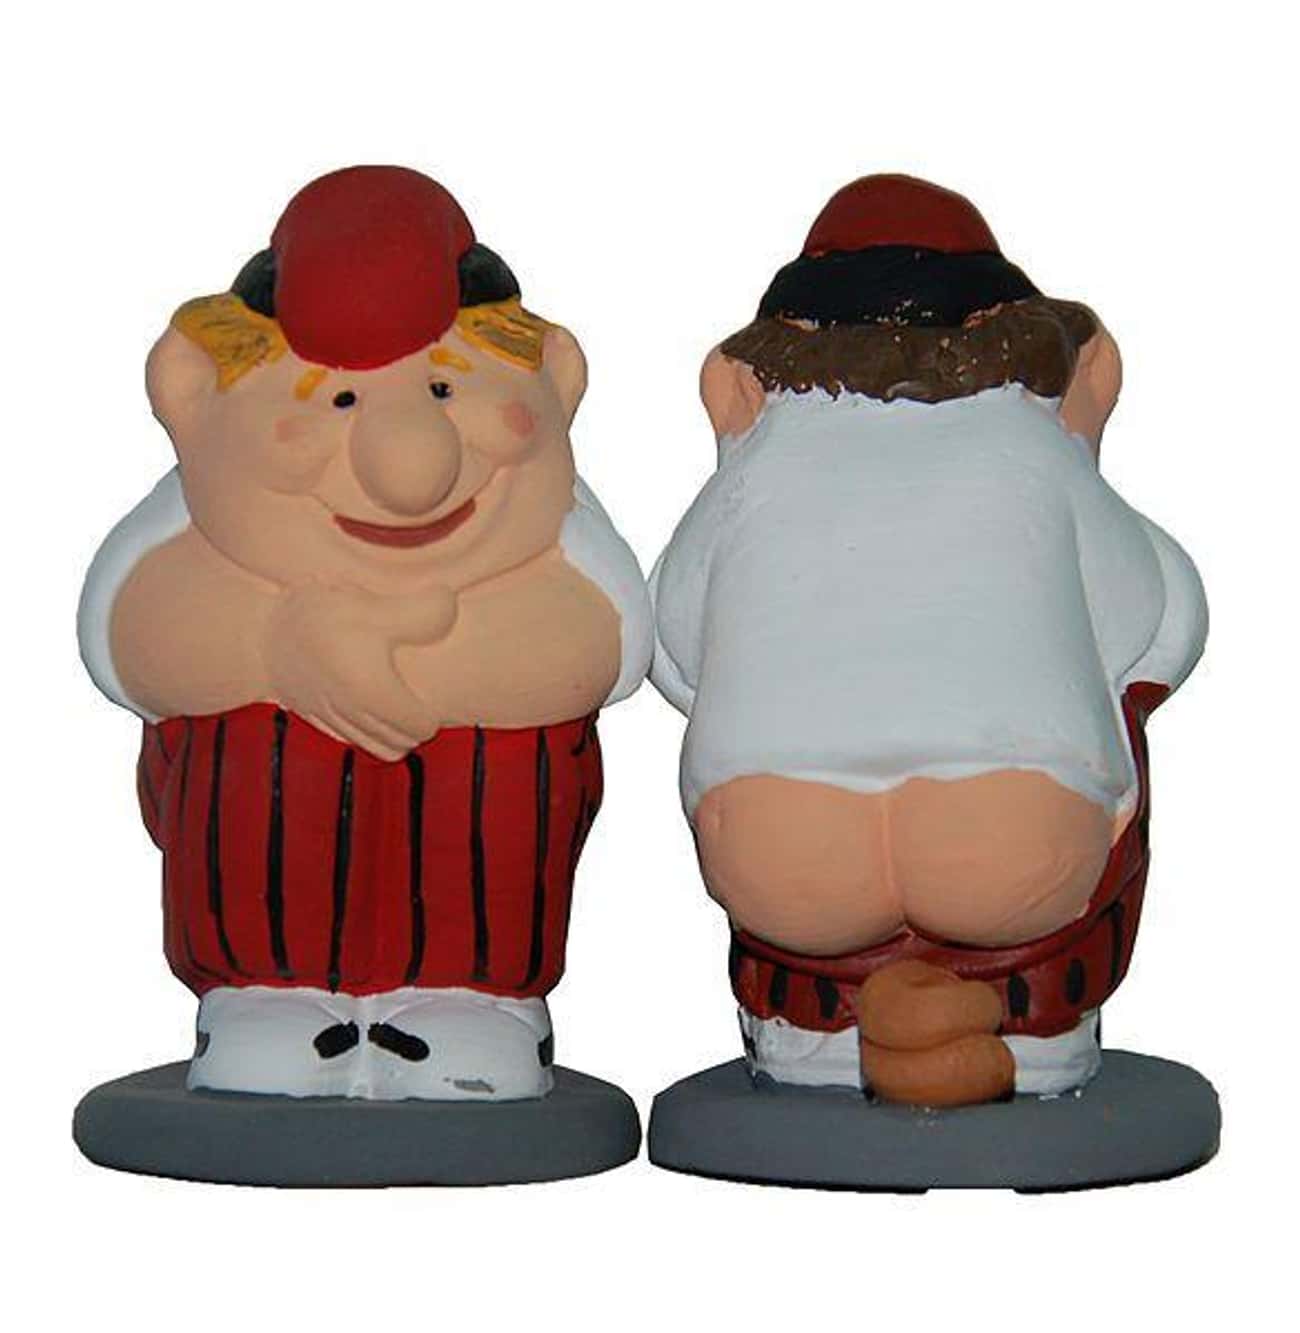 The Word "Caganer" Literally Means "Pooper" Or "Crapper"